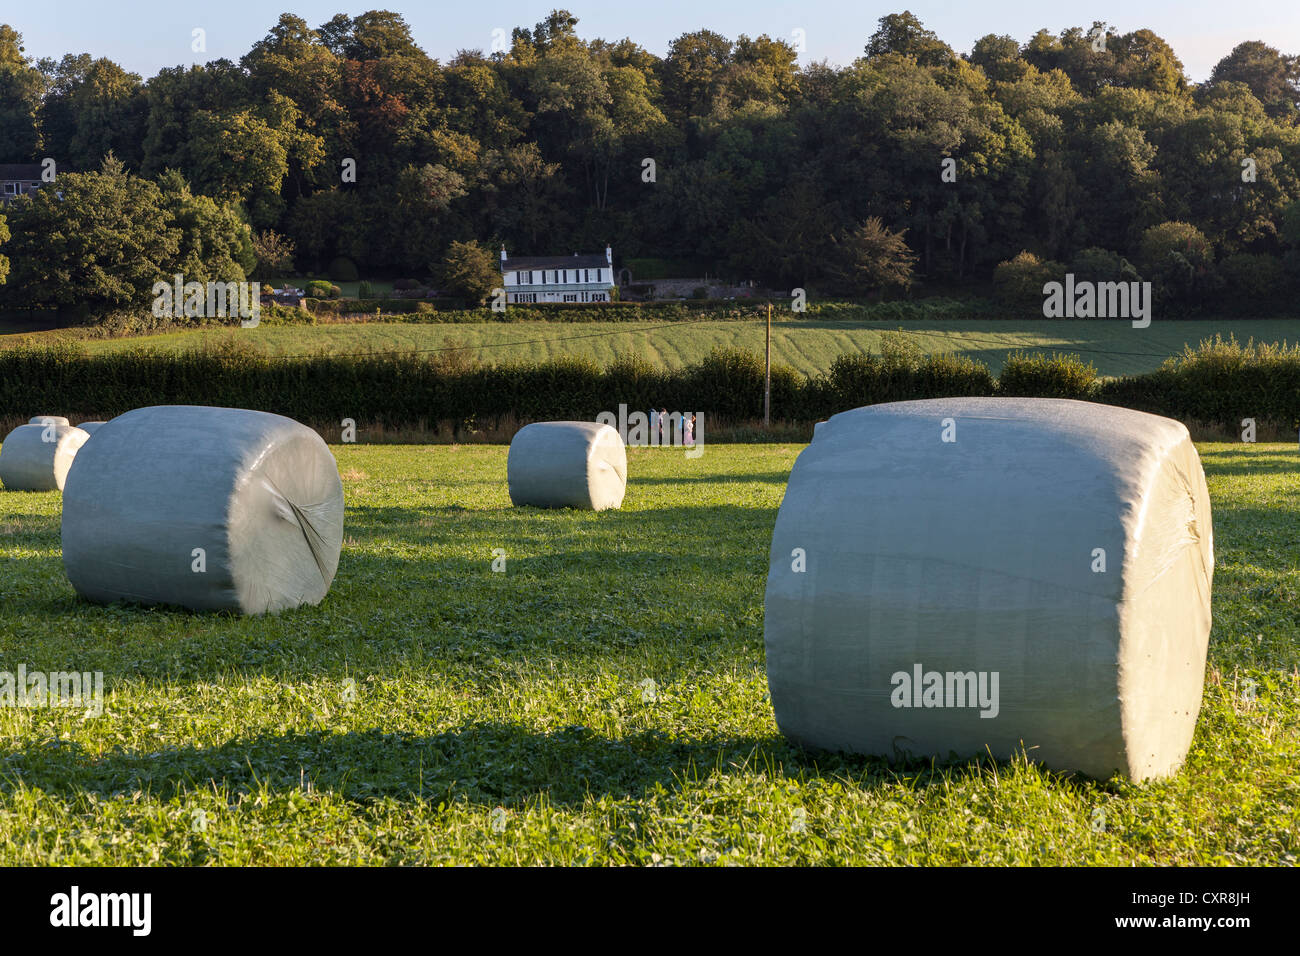 HAY BALES WRAPPED IN PLASTIC IN FIELD GLOUCESTERSHIRE ENGLAND WITH WALKERS IN BACKGROUND UK Stock Photo